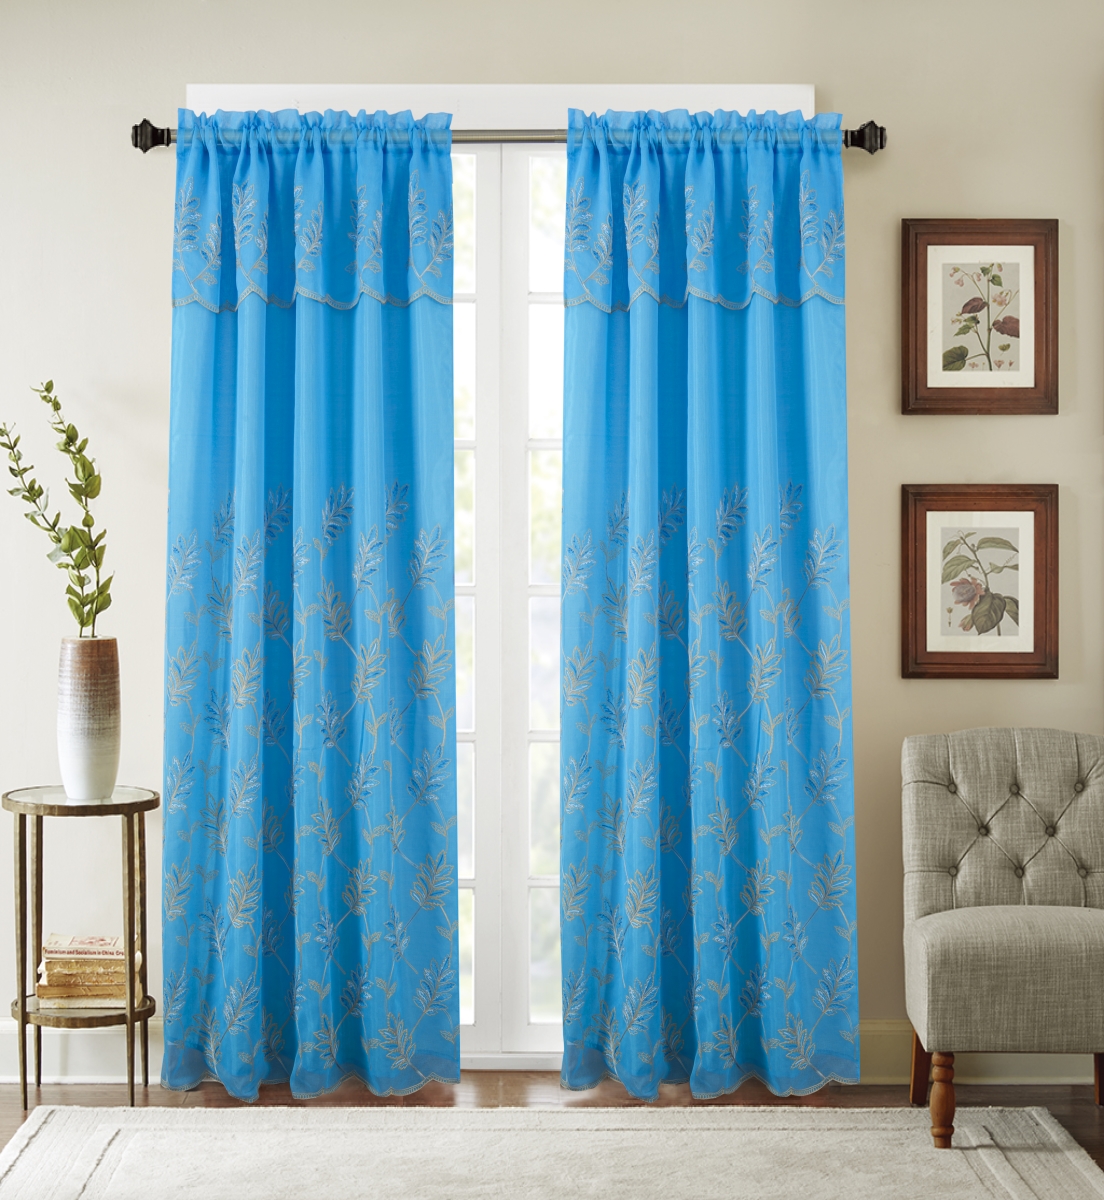 Pnb23708 54 X 90 In. Burton Floral Embroidered Single Rod Pocket Curtain Panel With Attached Valance, Blue